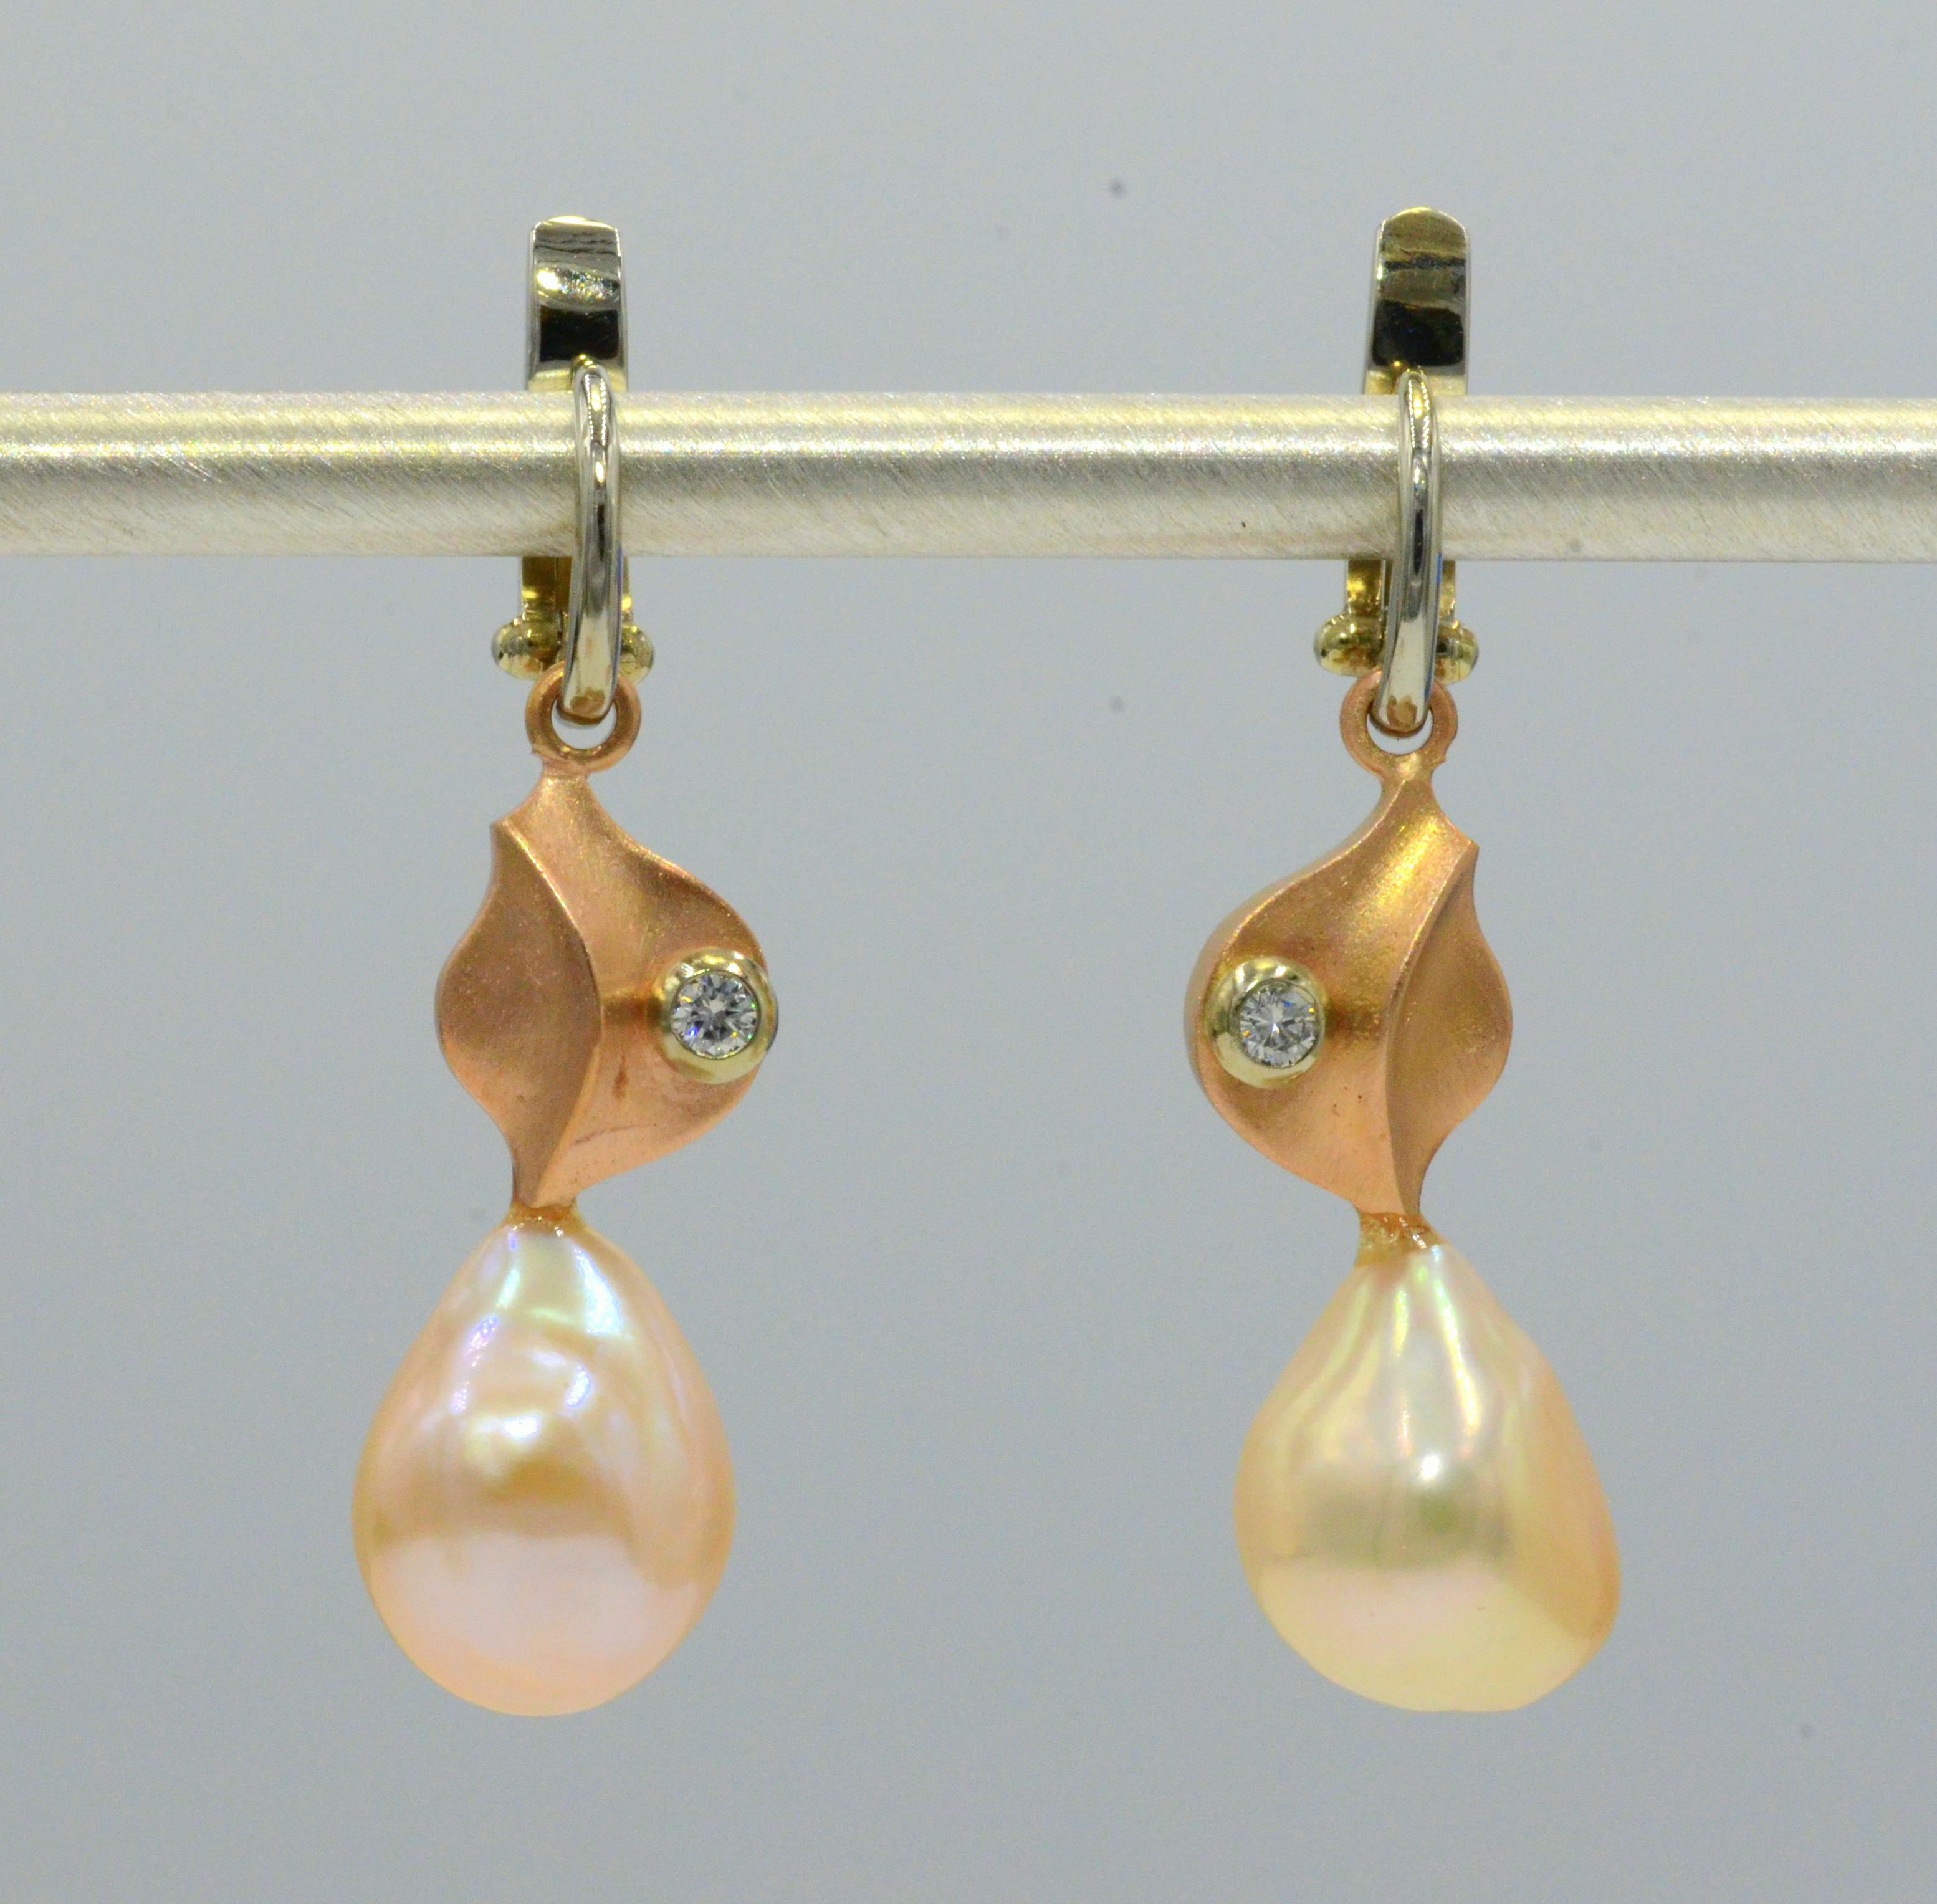 14 karat Rose Gold,Pearl and Diamond Euro Charm Earrings. These earrings are worn with our Euro Wire Earrings which are sold separately. Go to About page for further description of Euro Wire Earrings. 